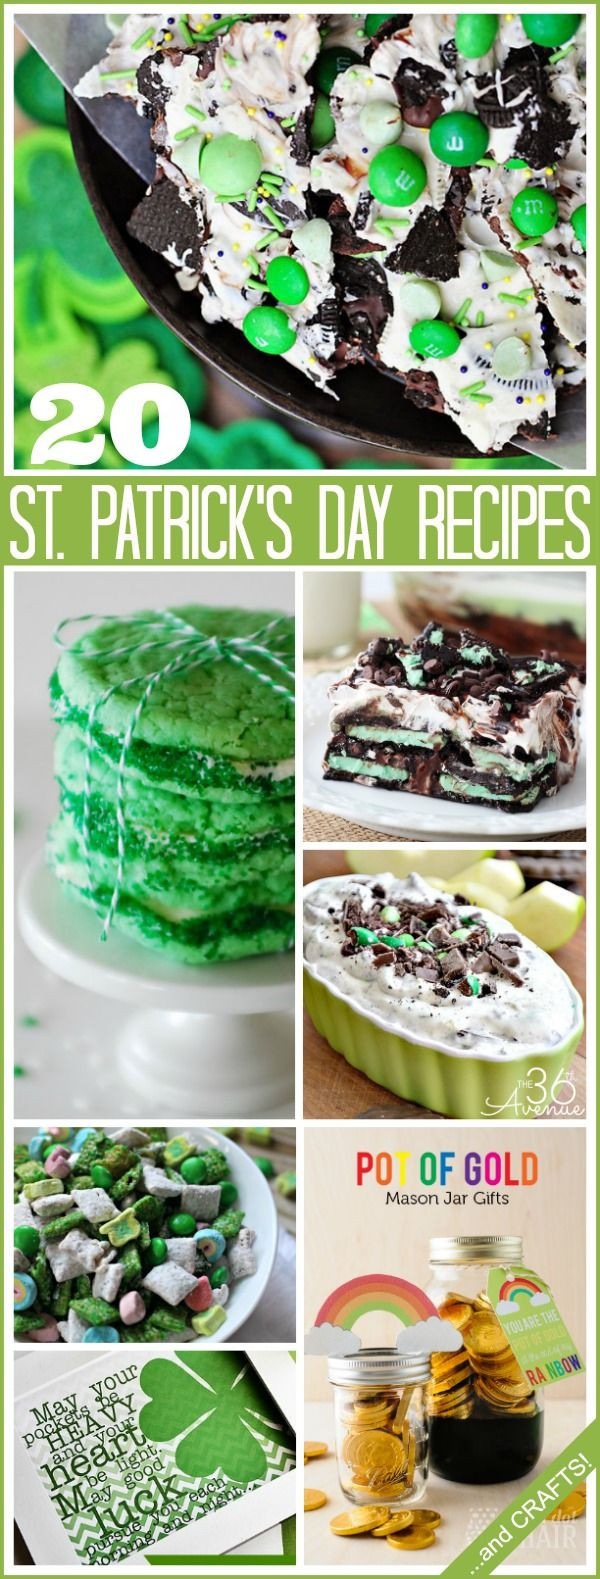 St Patrick's Day Lunch Ideas
 20 St Patricks Day Recipes and Ideas